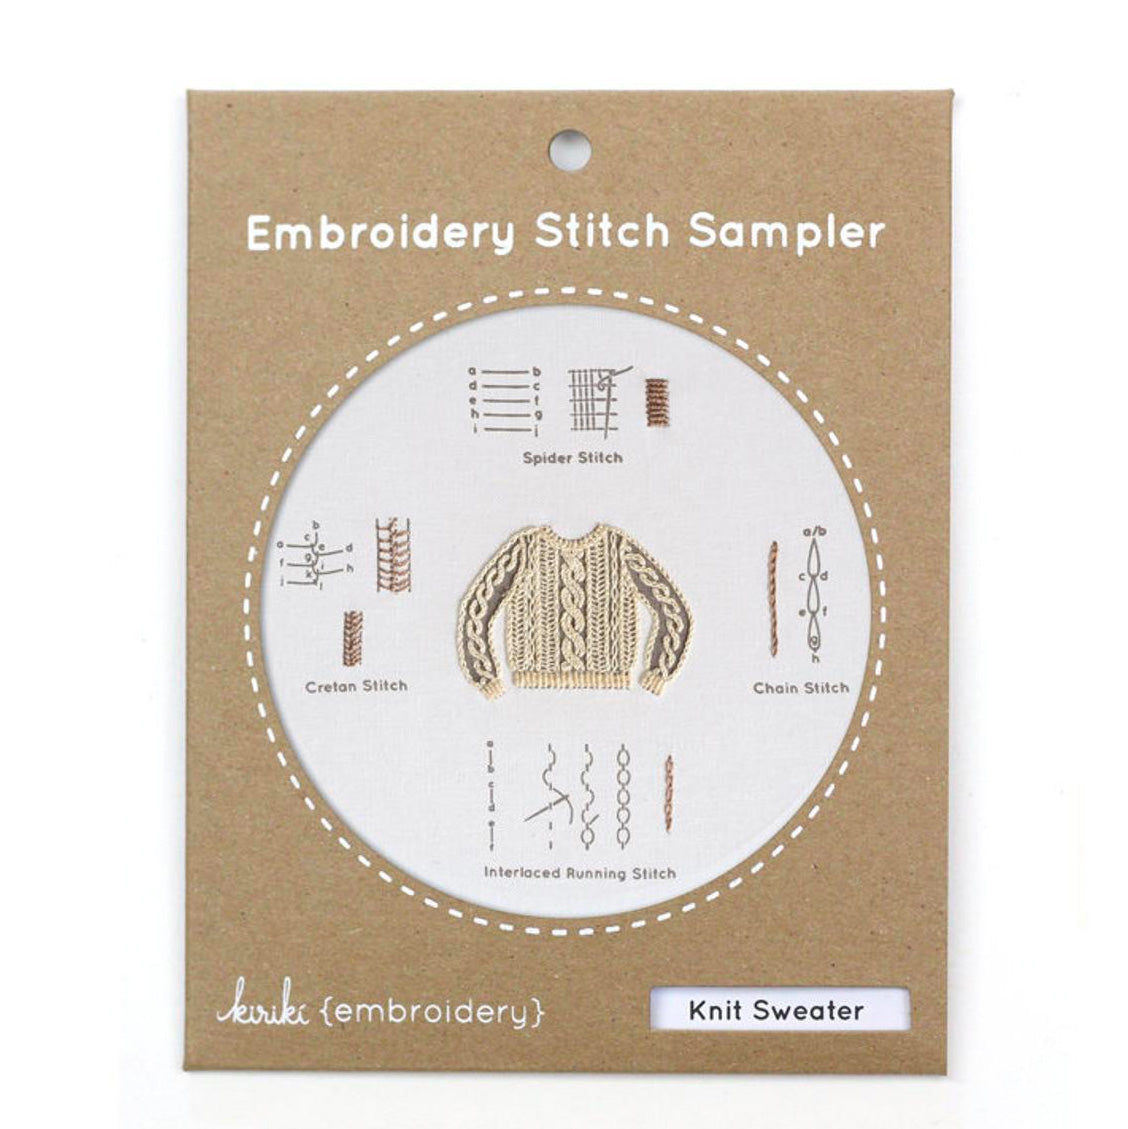 Hand Embroidery Stitch Sampler - Knit Sweater